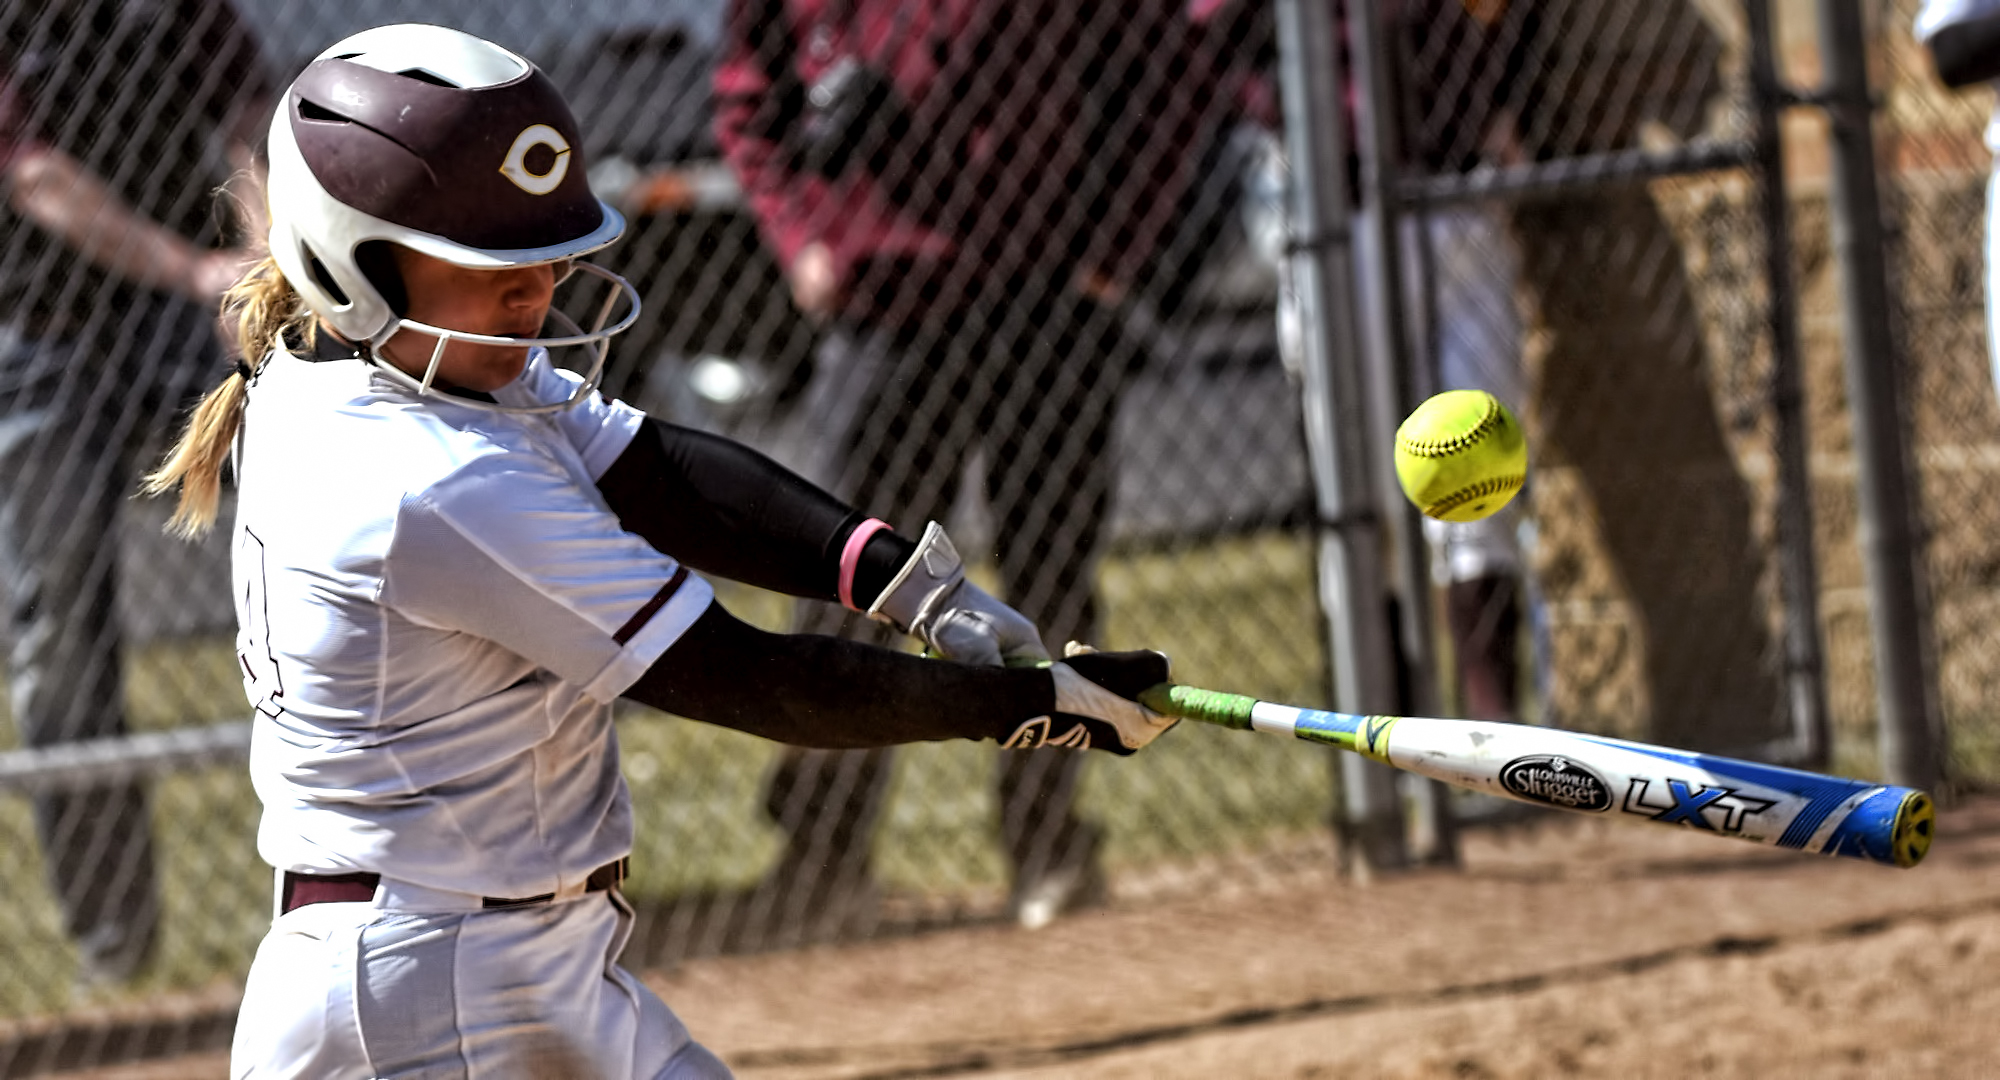 Sophomore Brooke Ankerfelt connects on a pitch during the second game of the Cobbers' wind swept DH with Augsburg.